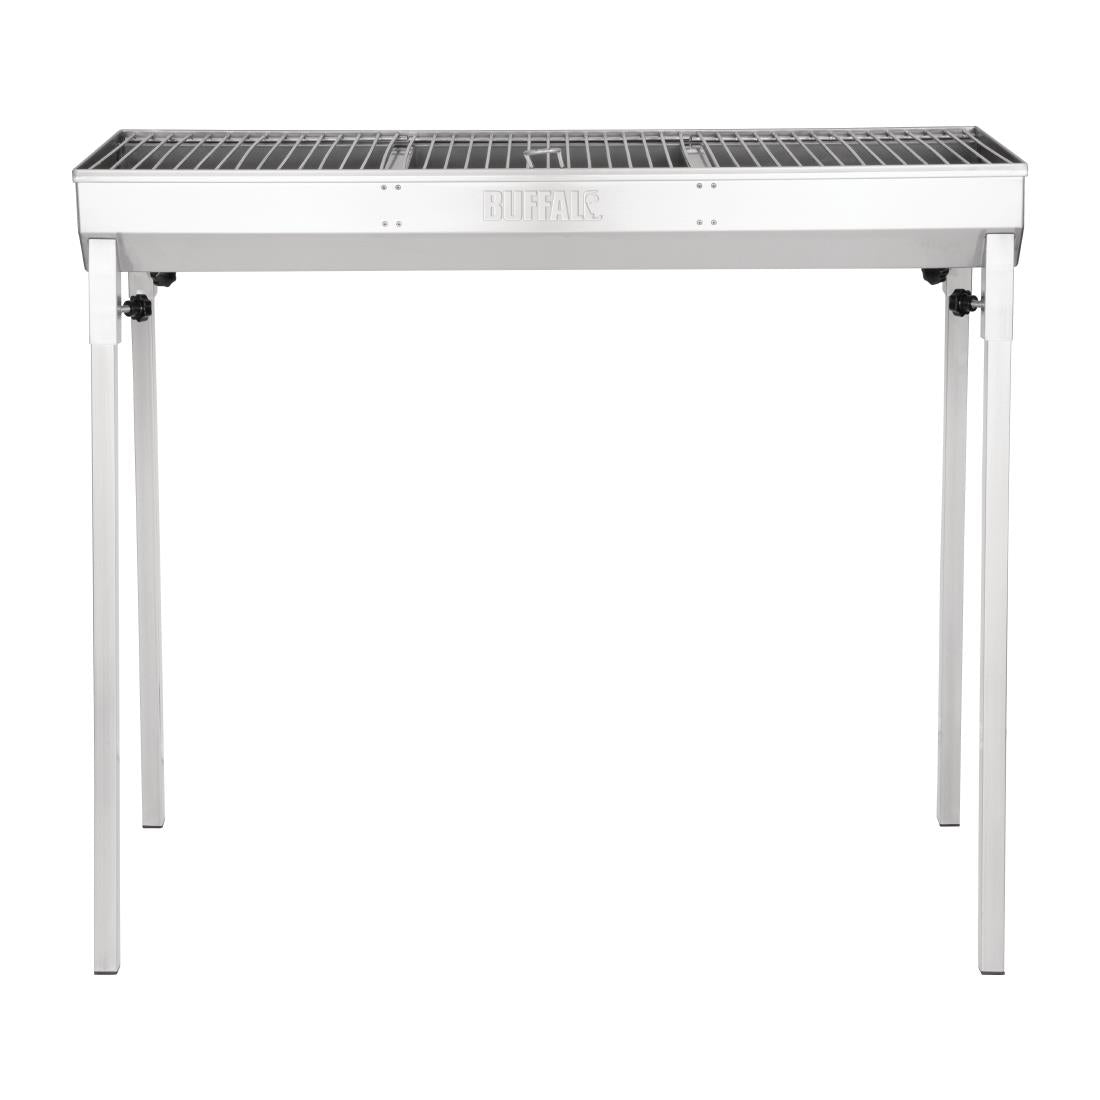 FT690 - Buffalo Charcoal Barbecue JD Catering Equipment Solutions Ltd